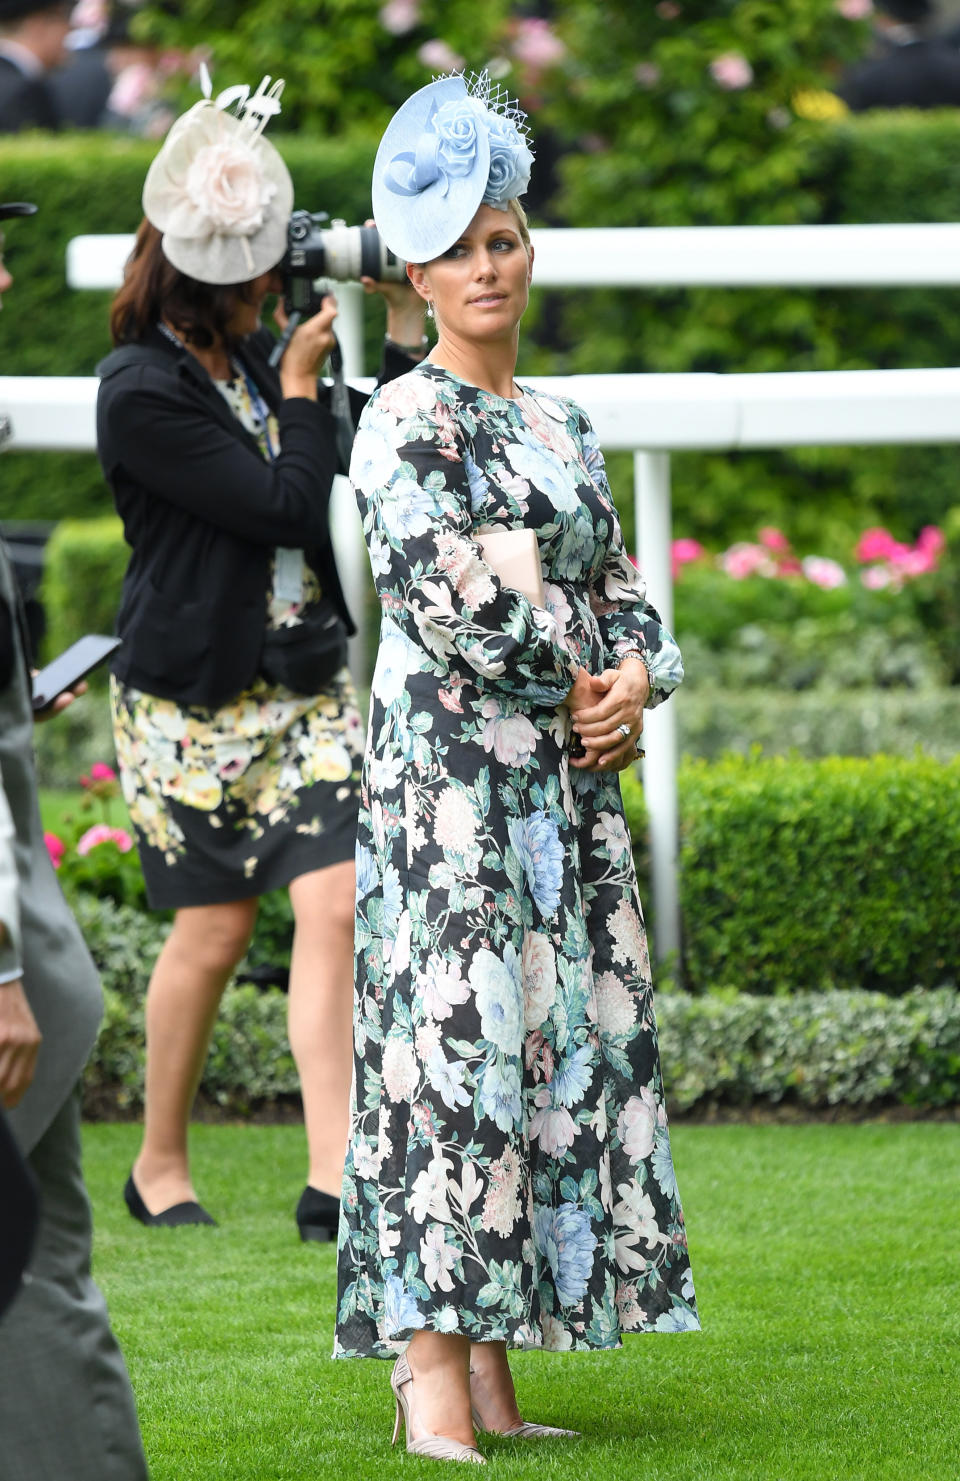 Zara Phillips in a blue hat and blue and pink floral design.&nbsp; (Photo: Karwai Tang via Getty Images)